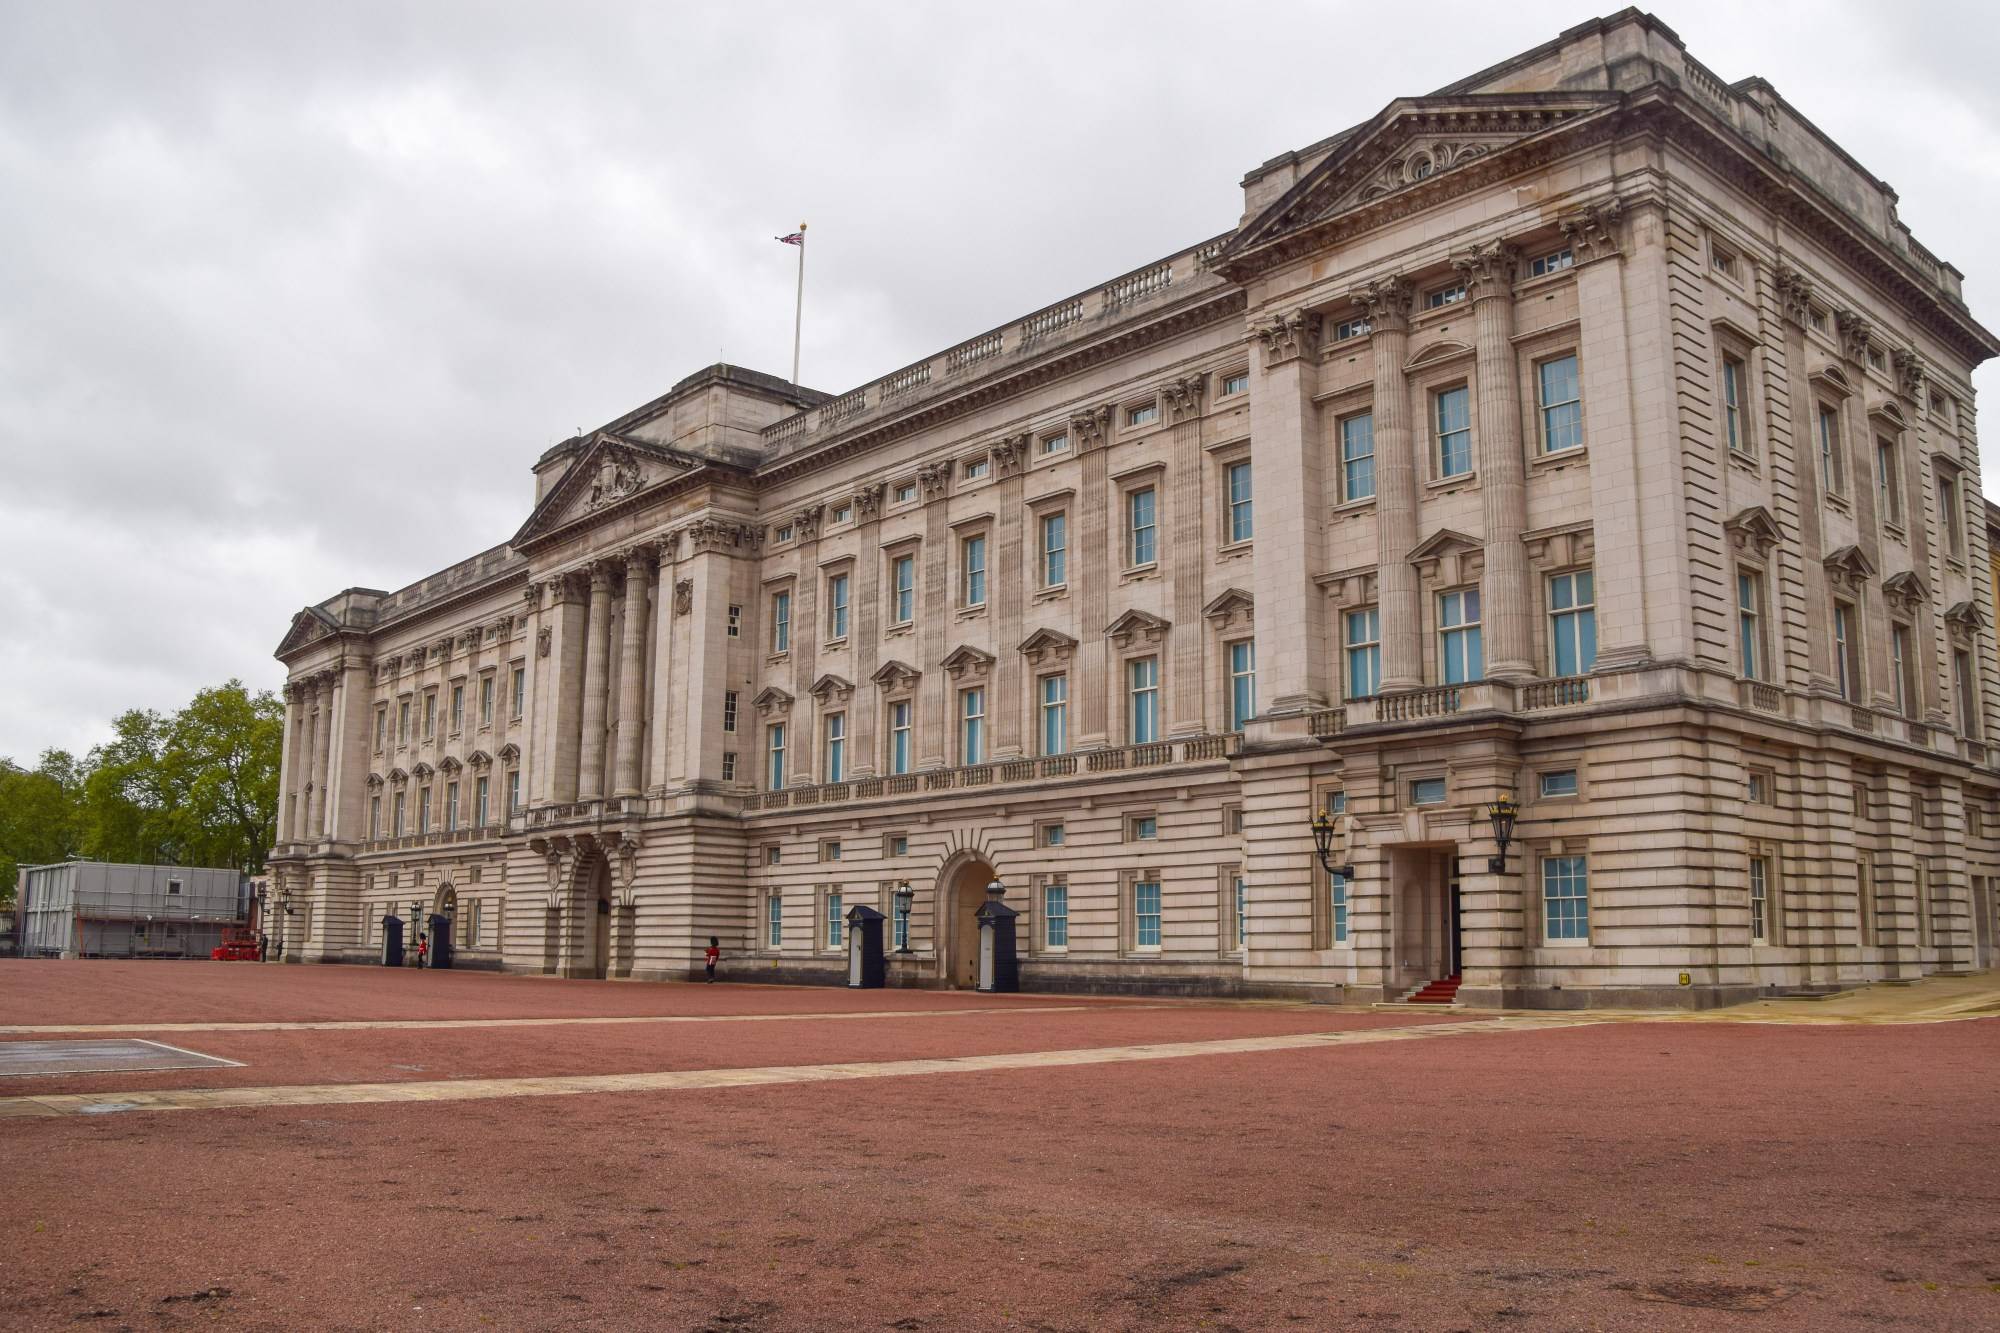 LONDON, UNITED KINGDOM - 2021/05/21: Exterior view of Buckingham Palace in London. (Photo by Vuk Valcic/SOPA Images/LightRocket via Getty Images)